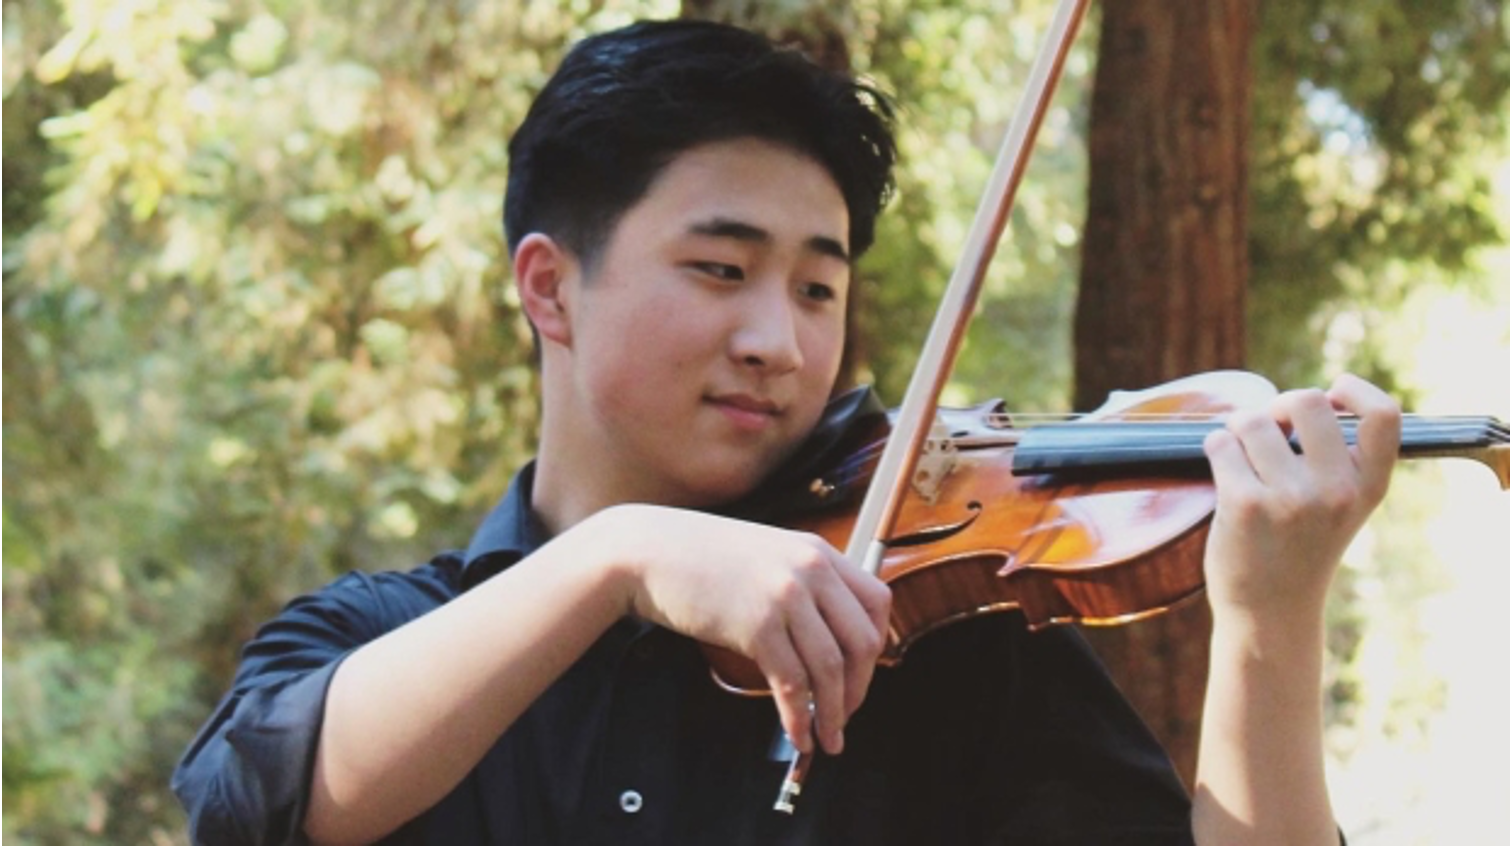 Aaron Kim of Brea, a senior studying at Valencia High School, is an instrumental music nominee in the specialty of piano and strings for Artist of the Year in 2022. (Photo courtesy of Charis Pak)